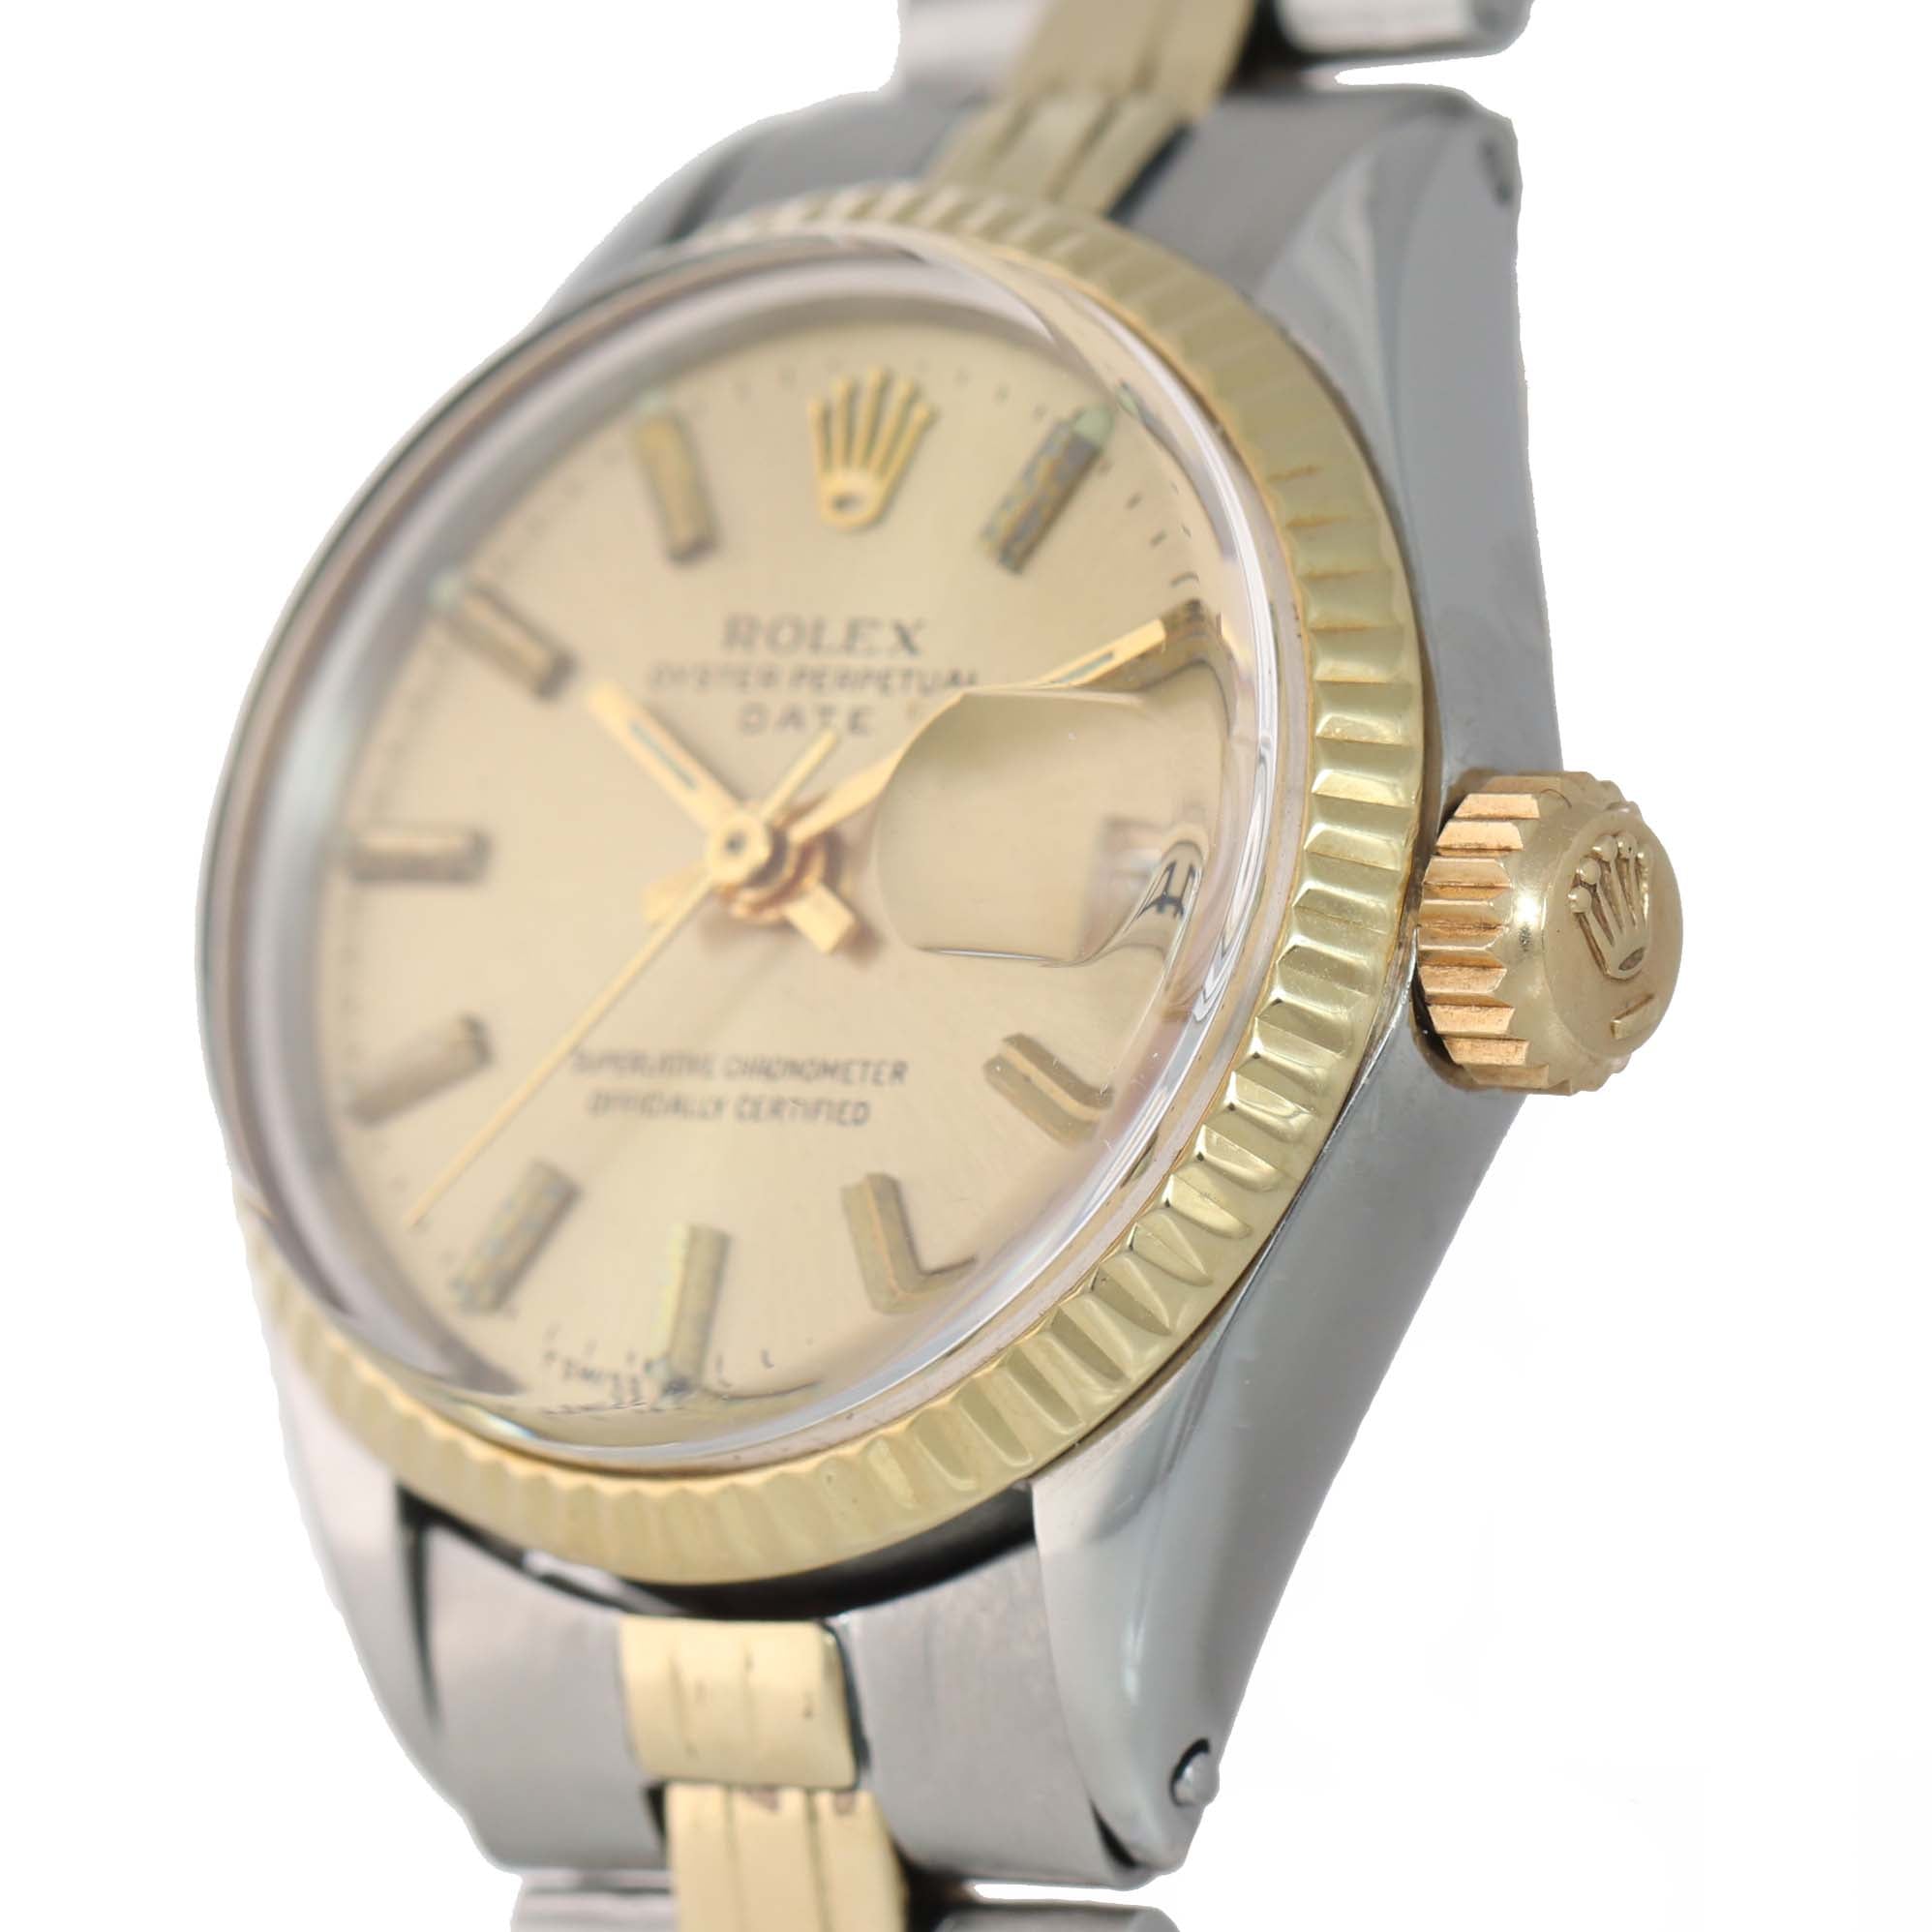 2019 SERVICE Ladies Rolex Date 6516 Two Tone 14k Gold Steel Champagne Watch Box